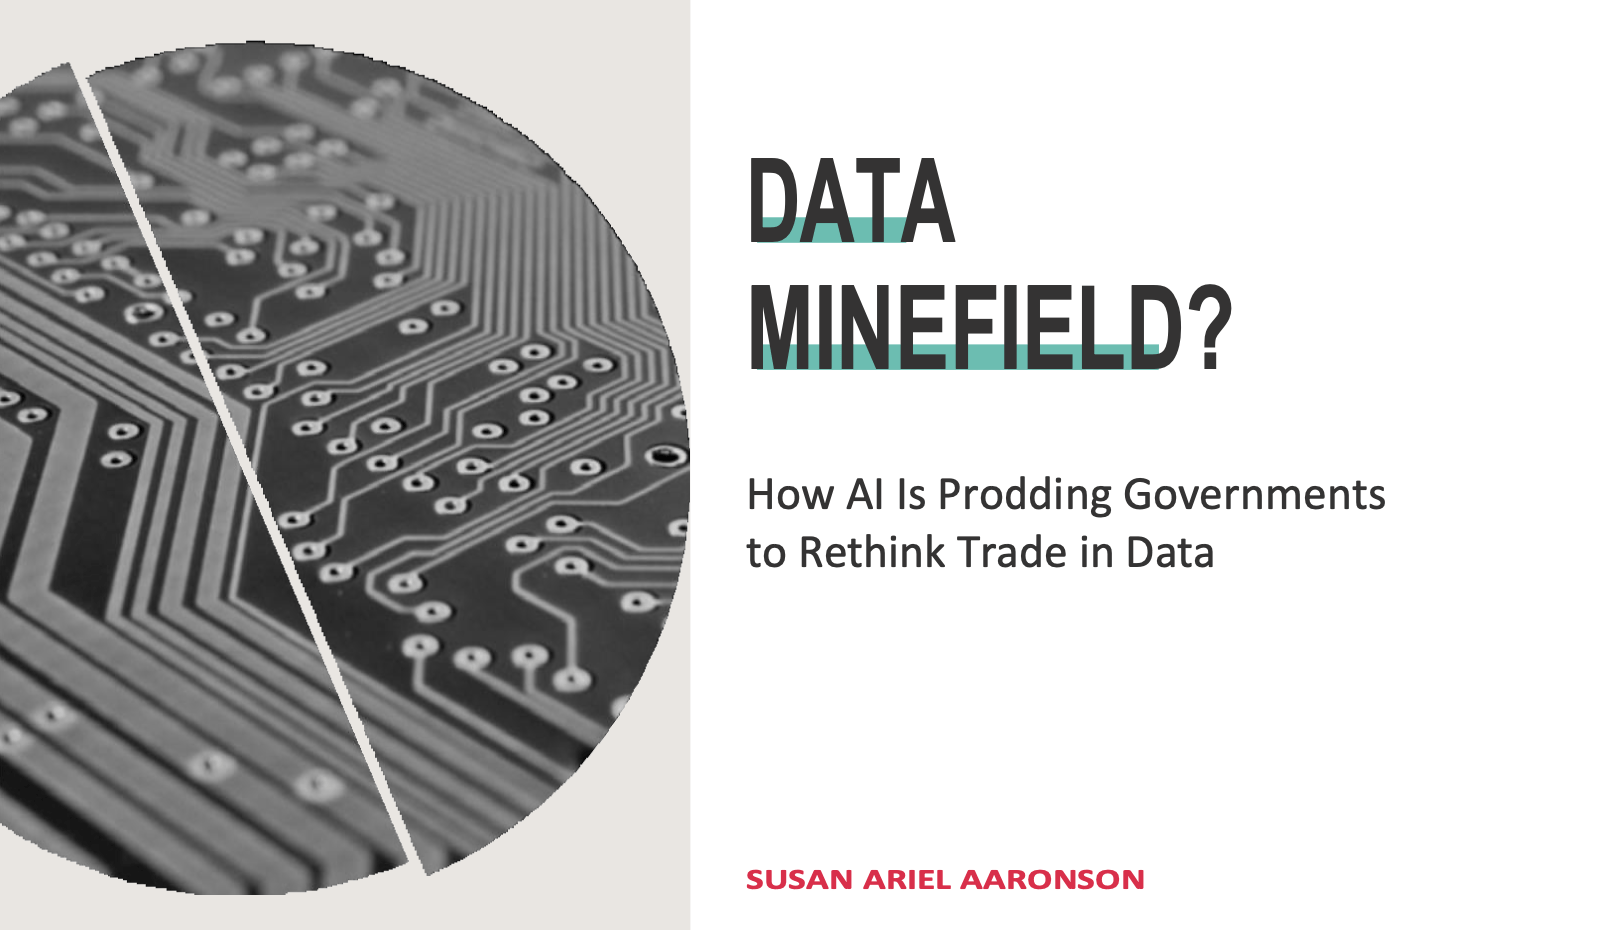 DATA MINEFIELD? How AI Is Prodding Governments to Rethink Trade in Data